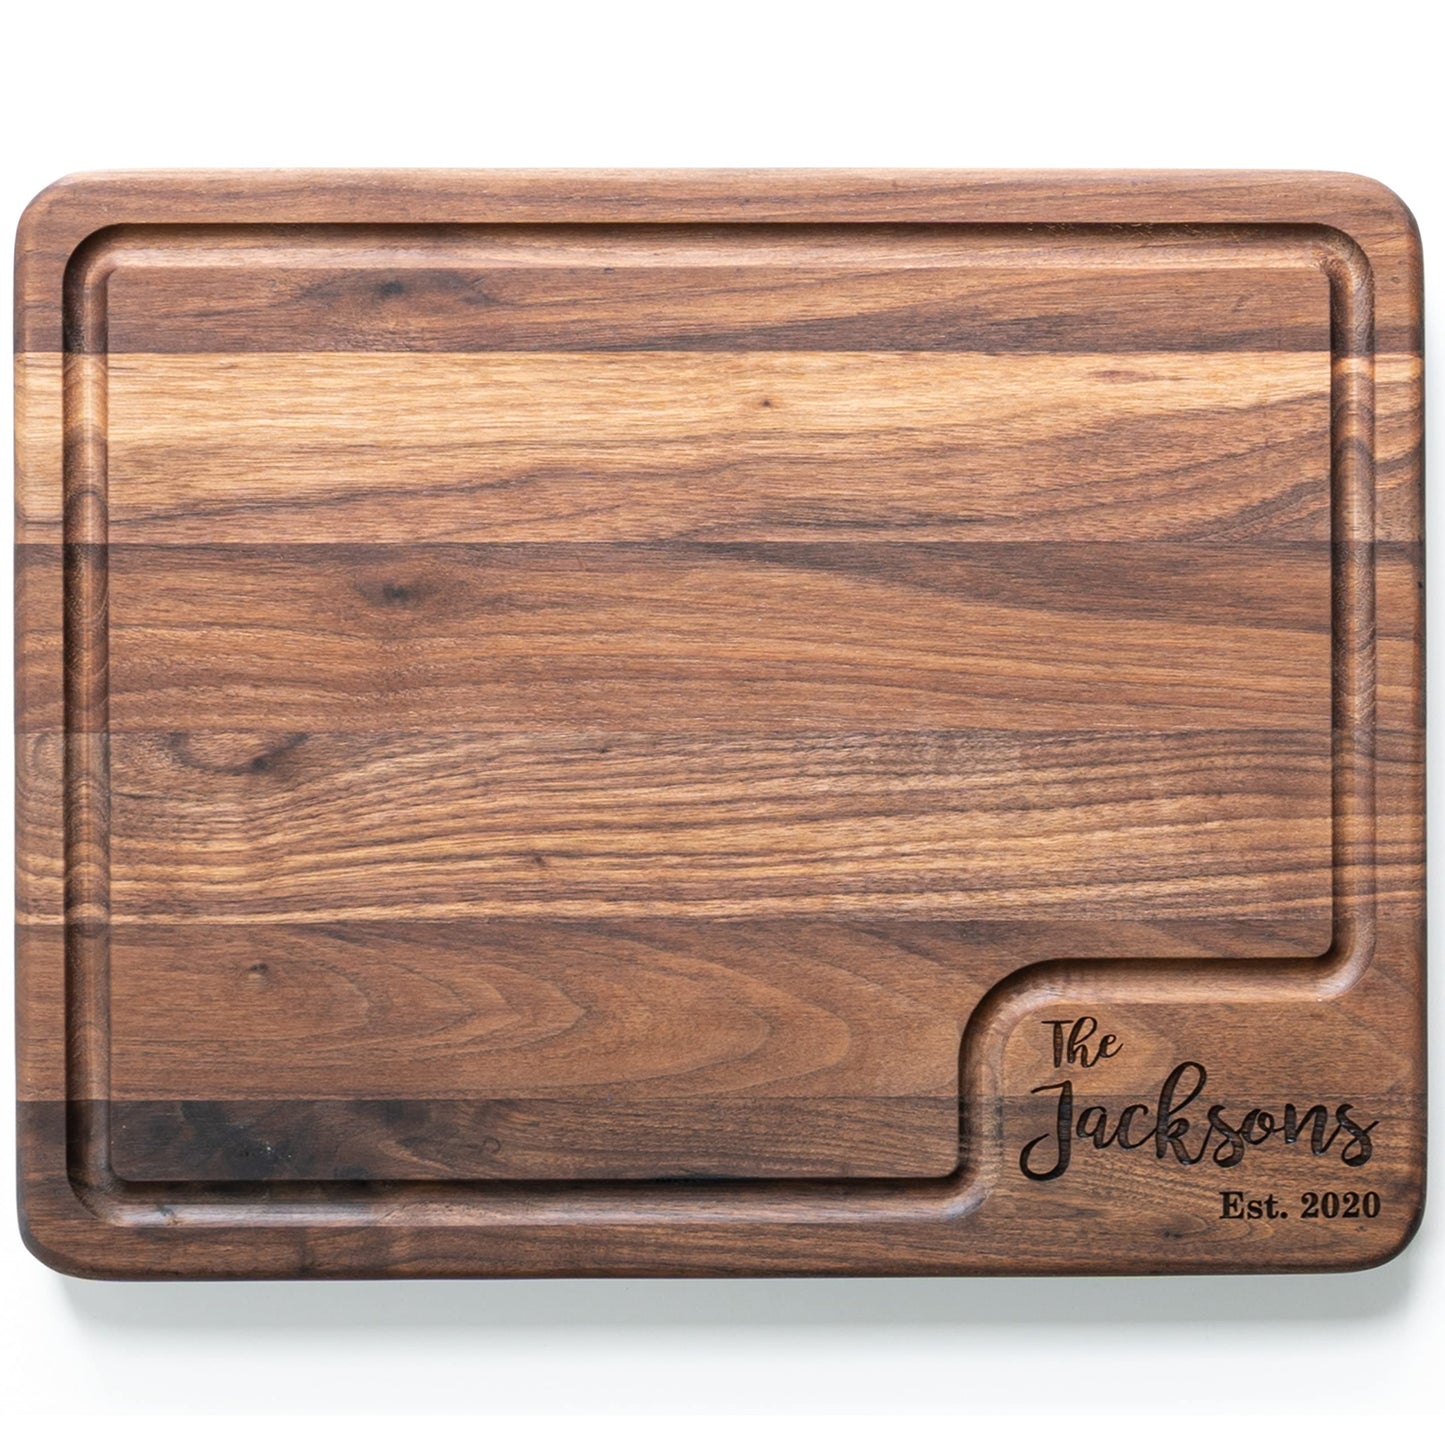 Custom Cutting Boards Wood Engraved Cutting Board Personalized, USA Made - Thick Maple/Walnut Personalized Cutting Boards Wood Engraved, Personalized